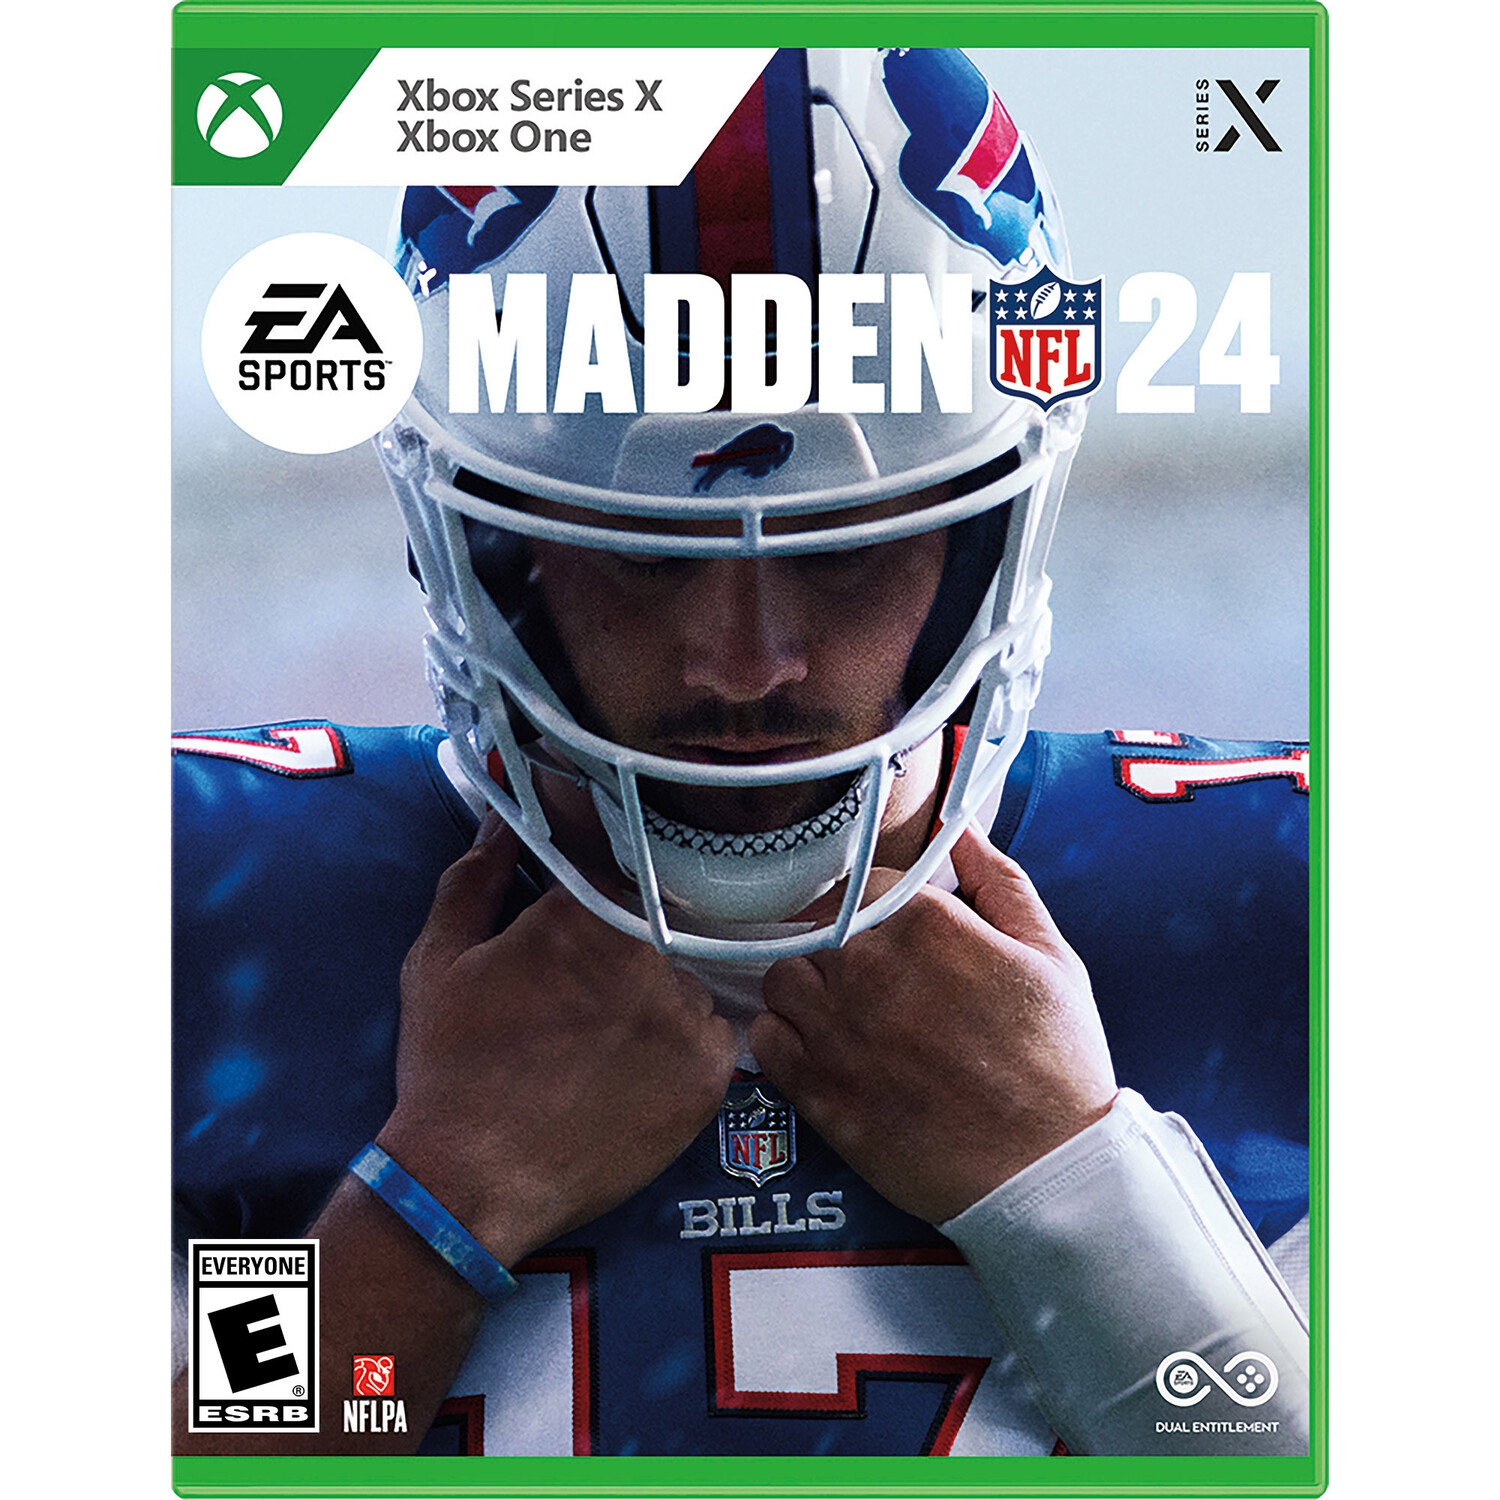 Madden NFL 24 for XBOX Series X and Xbox One [VIDEOGAMES] Xbox One, Xbox Series X